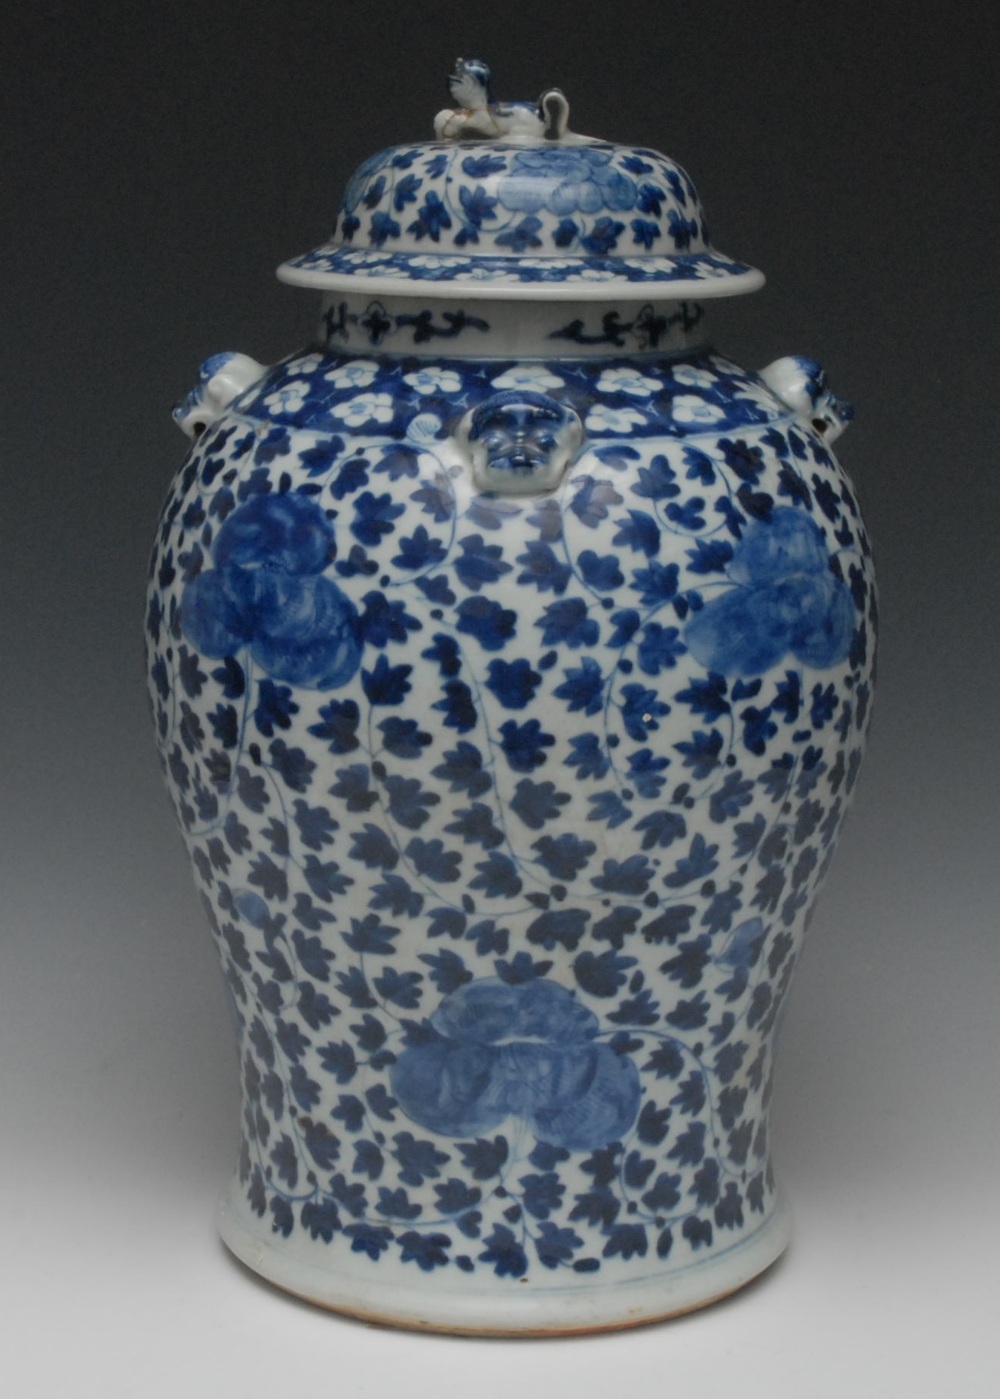 A Chinese porcelain baluster jar and cover, decorated in underglaze blue with stylized flora, lion